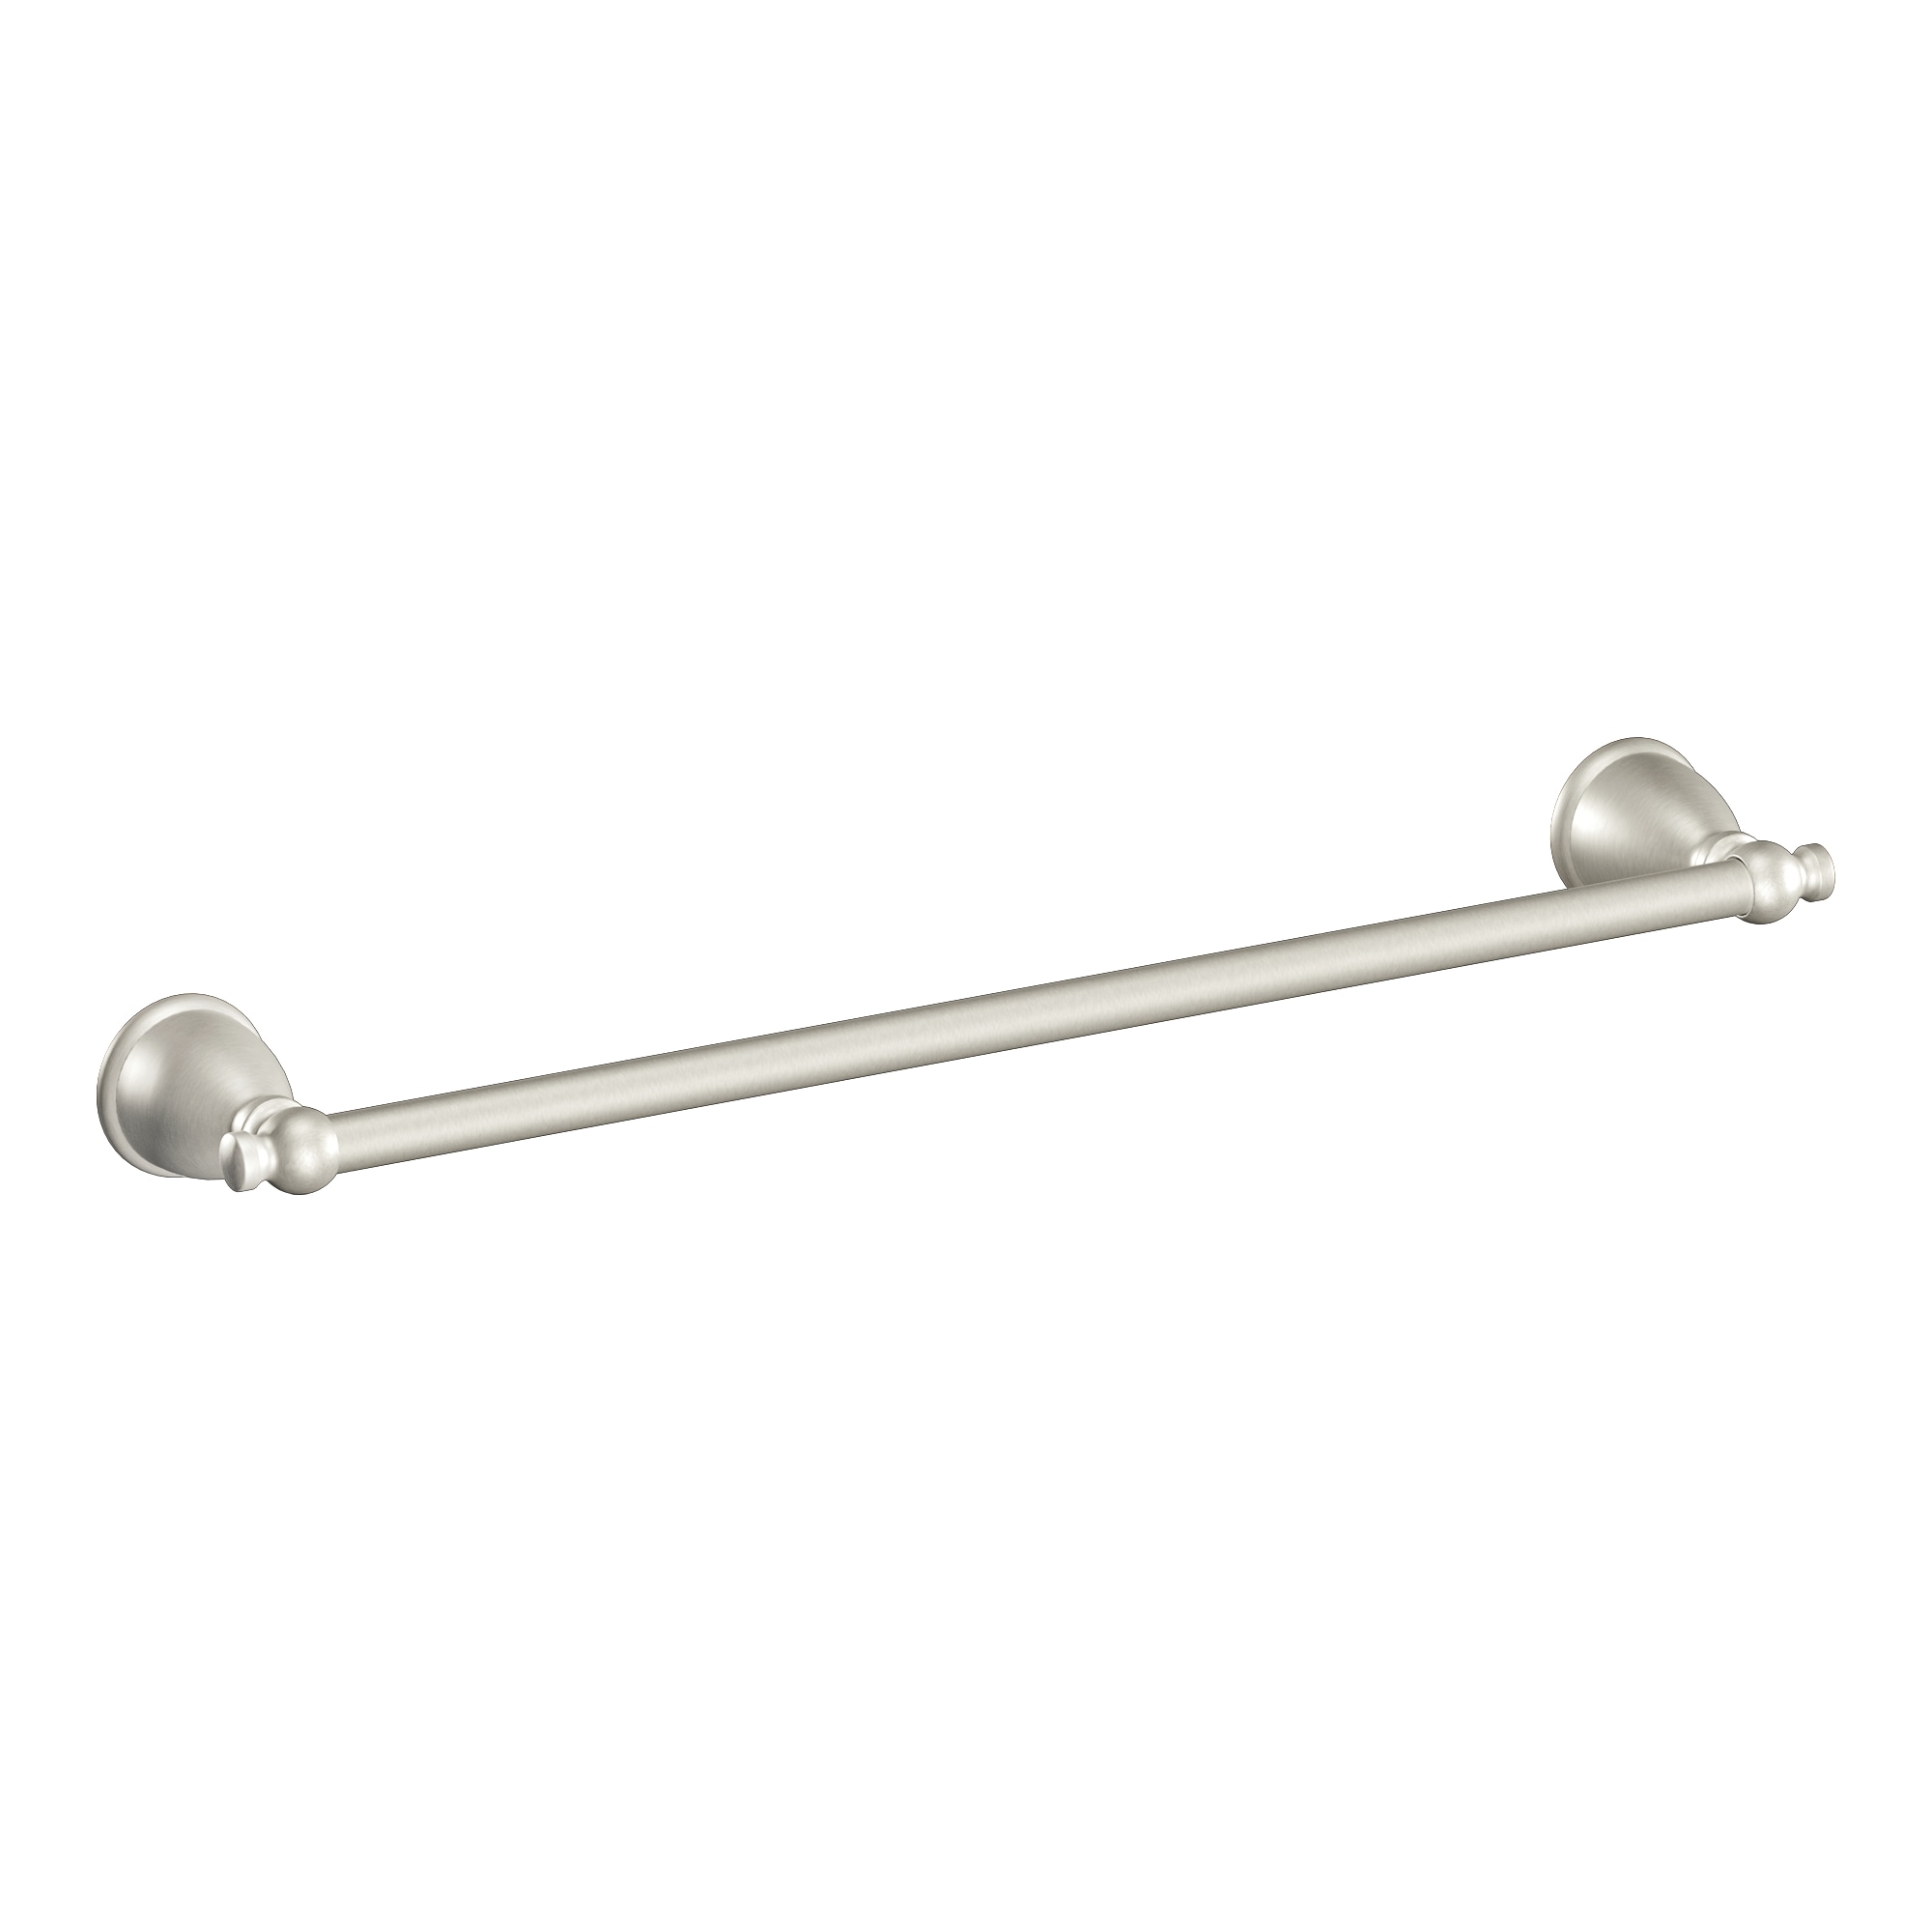 Slim Towel Rod for Bathroom Towel Bar 18 inch Medium Size Stainless Steel  with fitting accessories